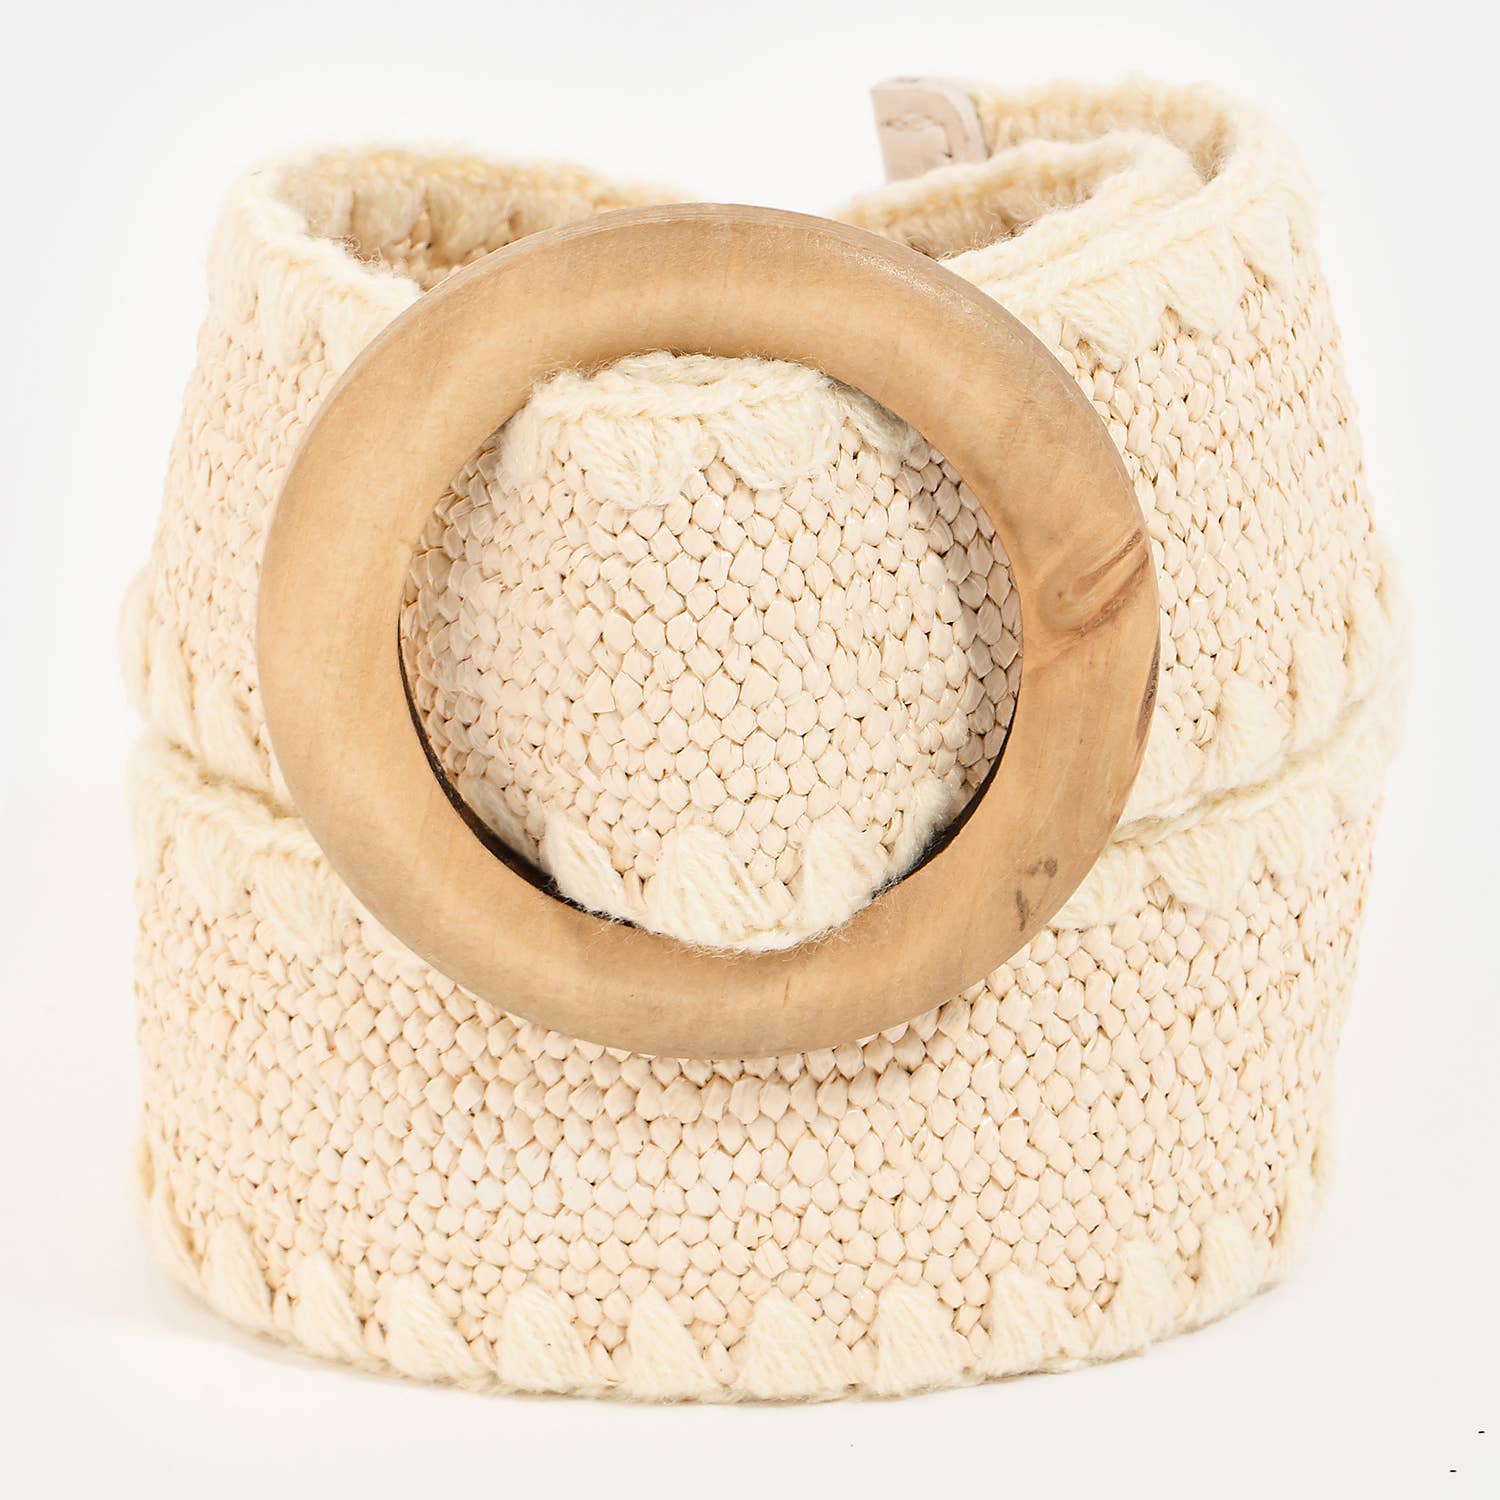 Collections by Fame Accessories - Wooden Round Buckle Braided Fashion Belt